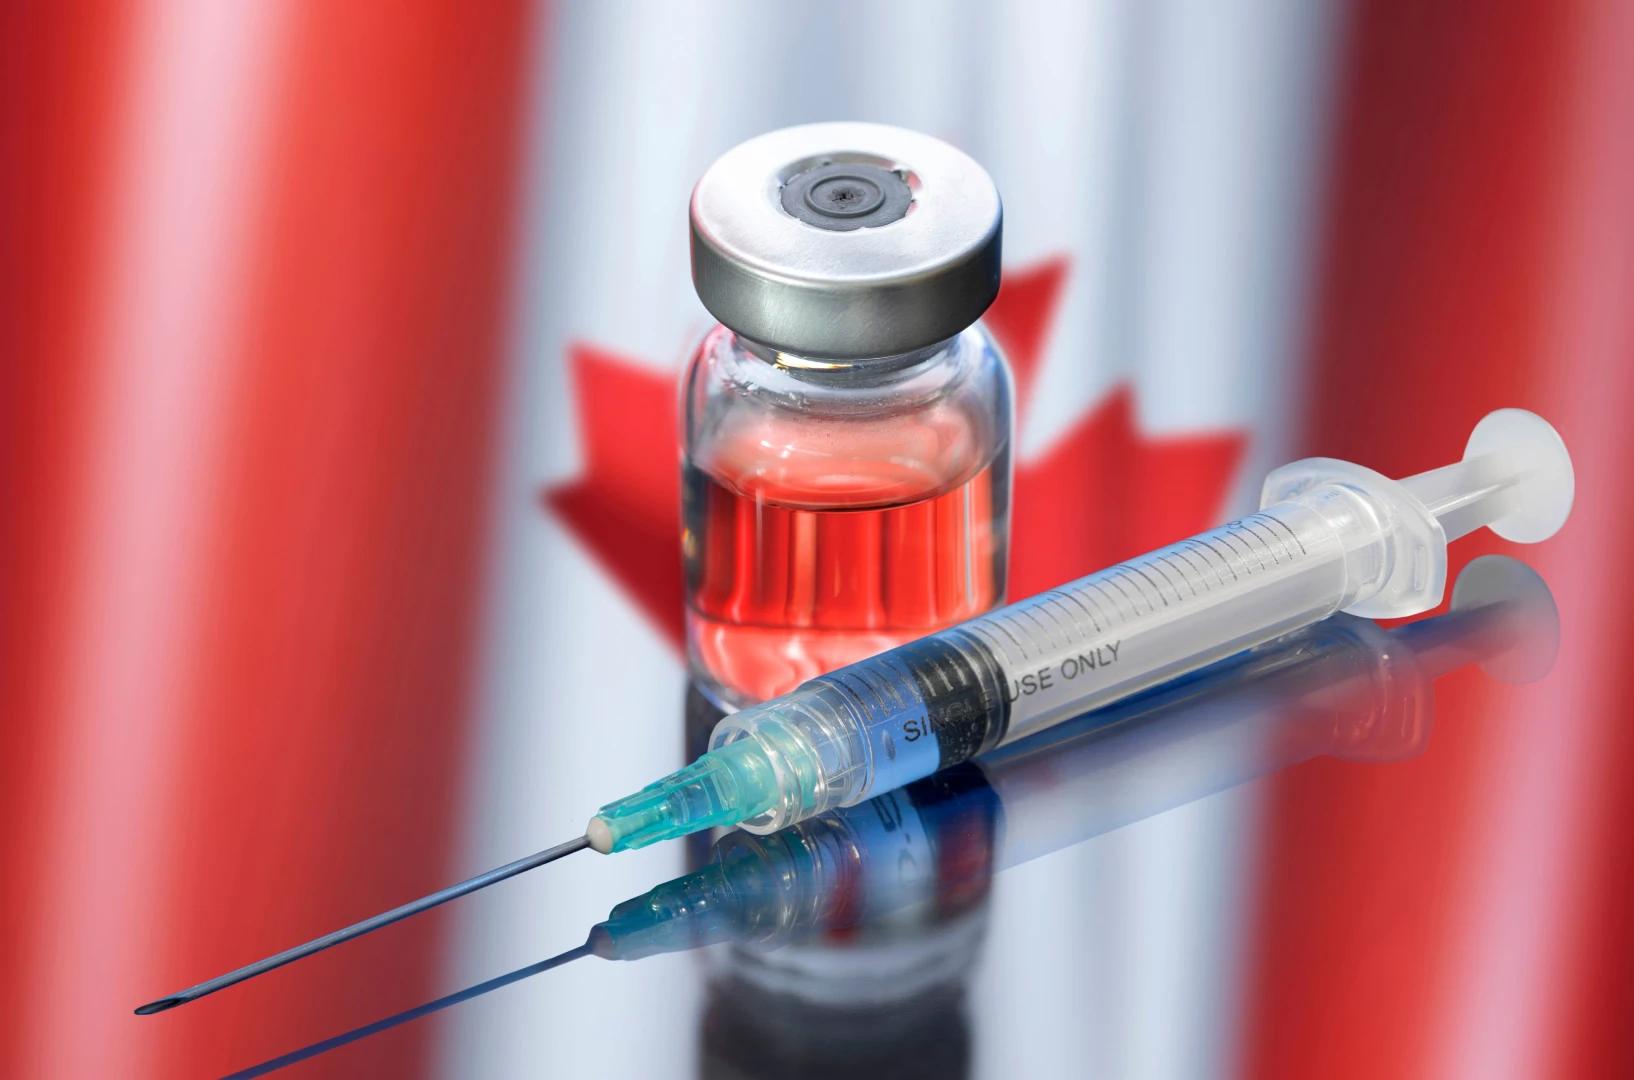 Trudeau threatens restrictions unless citizens get new injections, despite mortality data